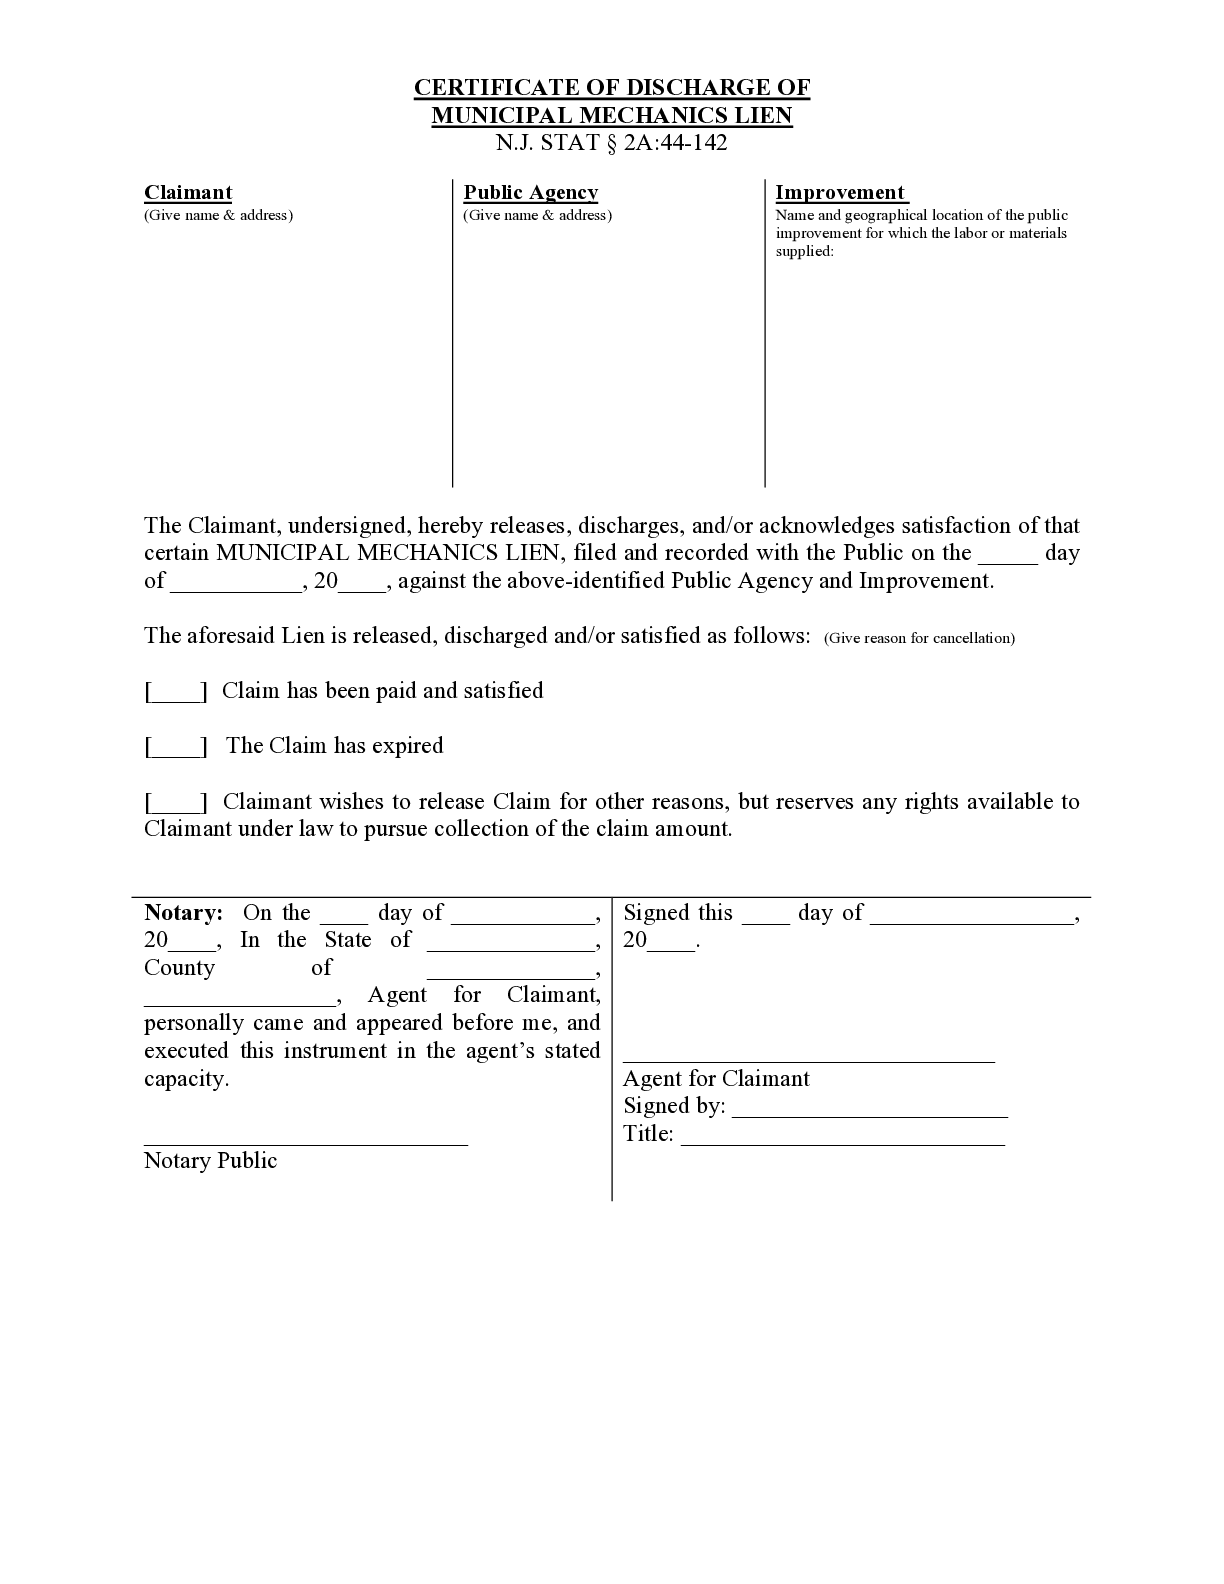 New Jersey Discharge of Public Lien Form - free from